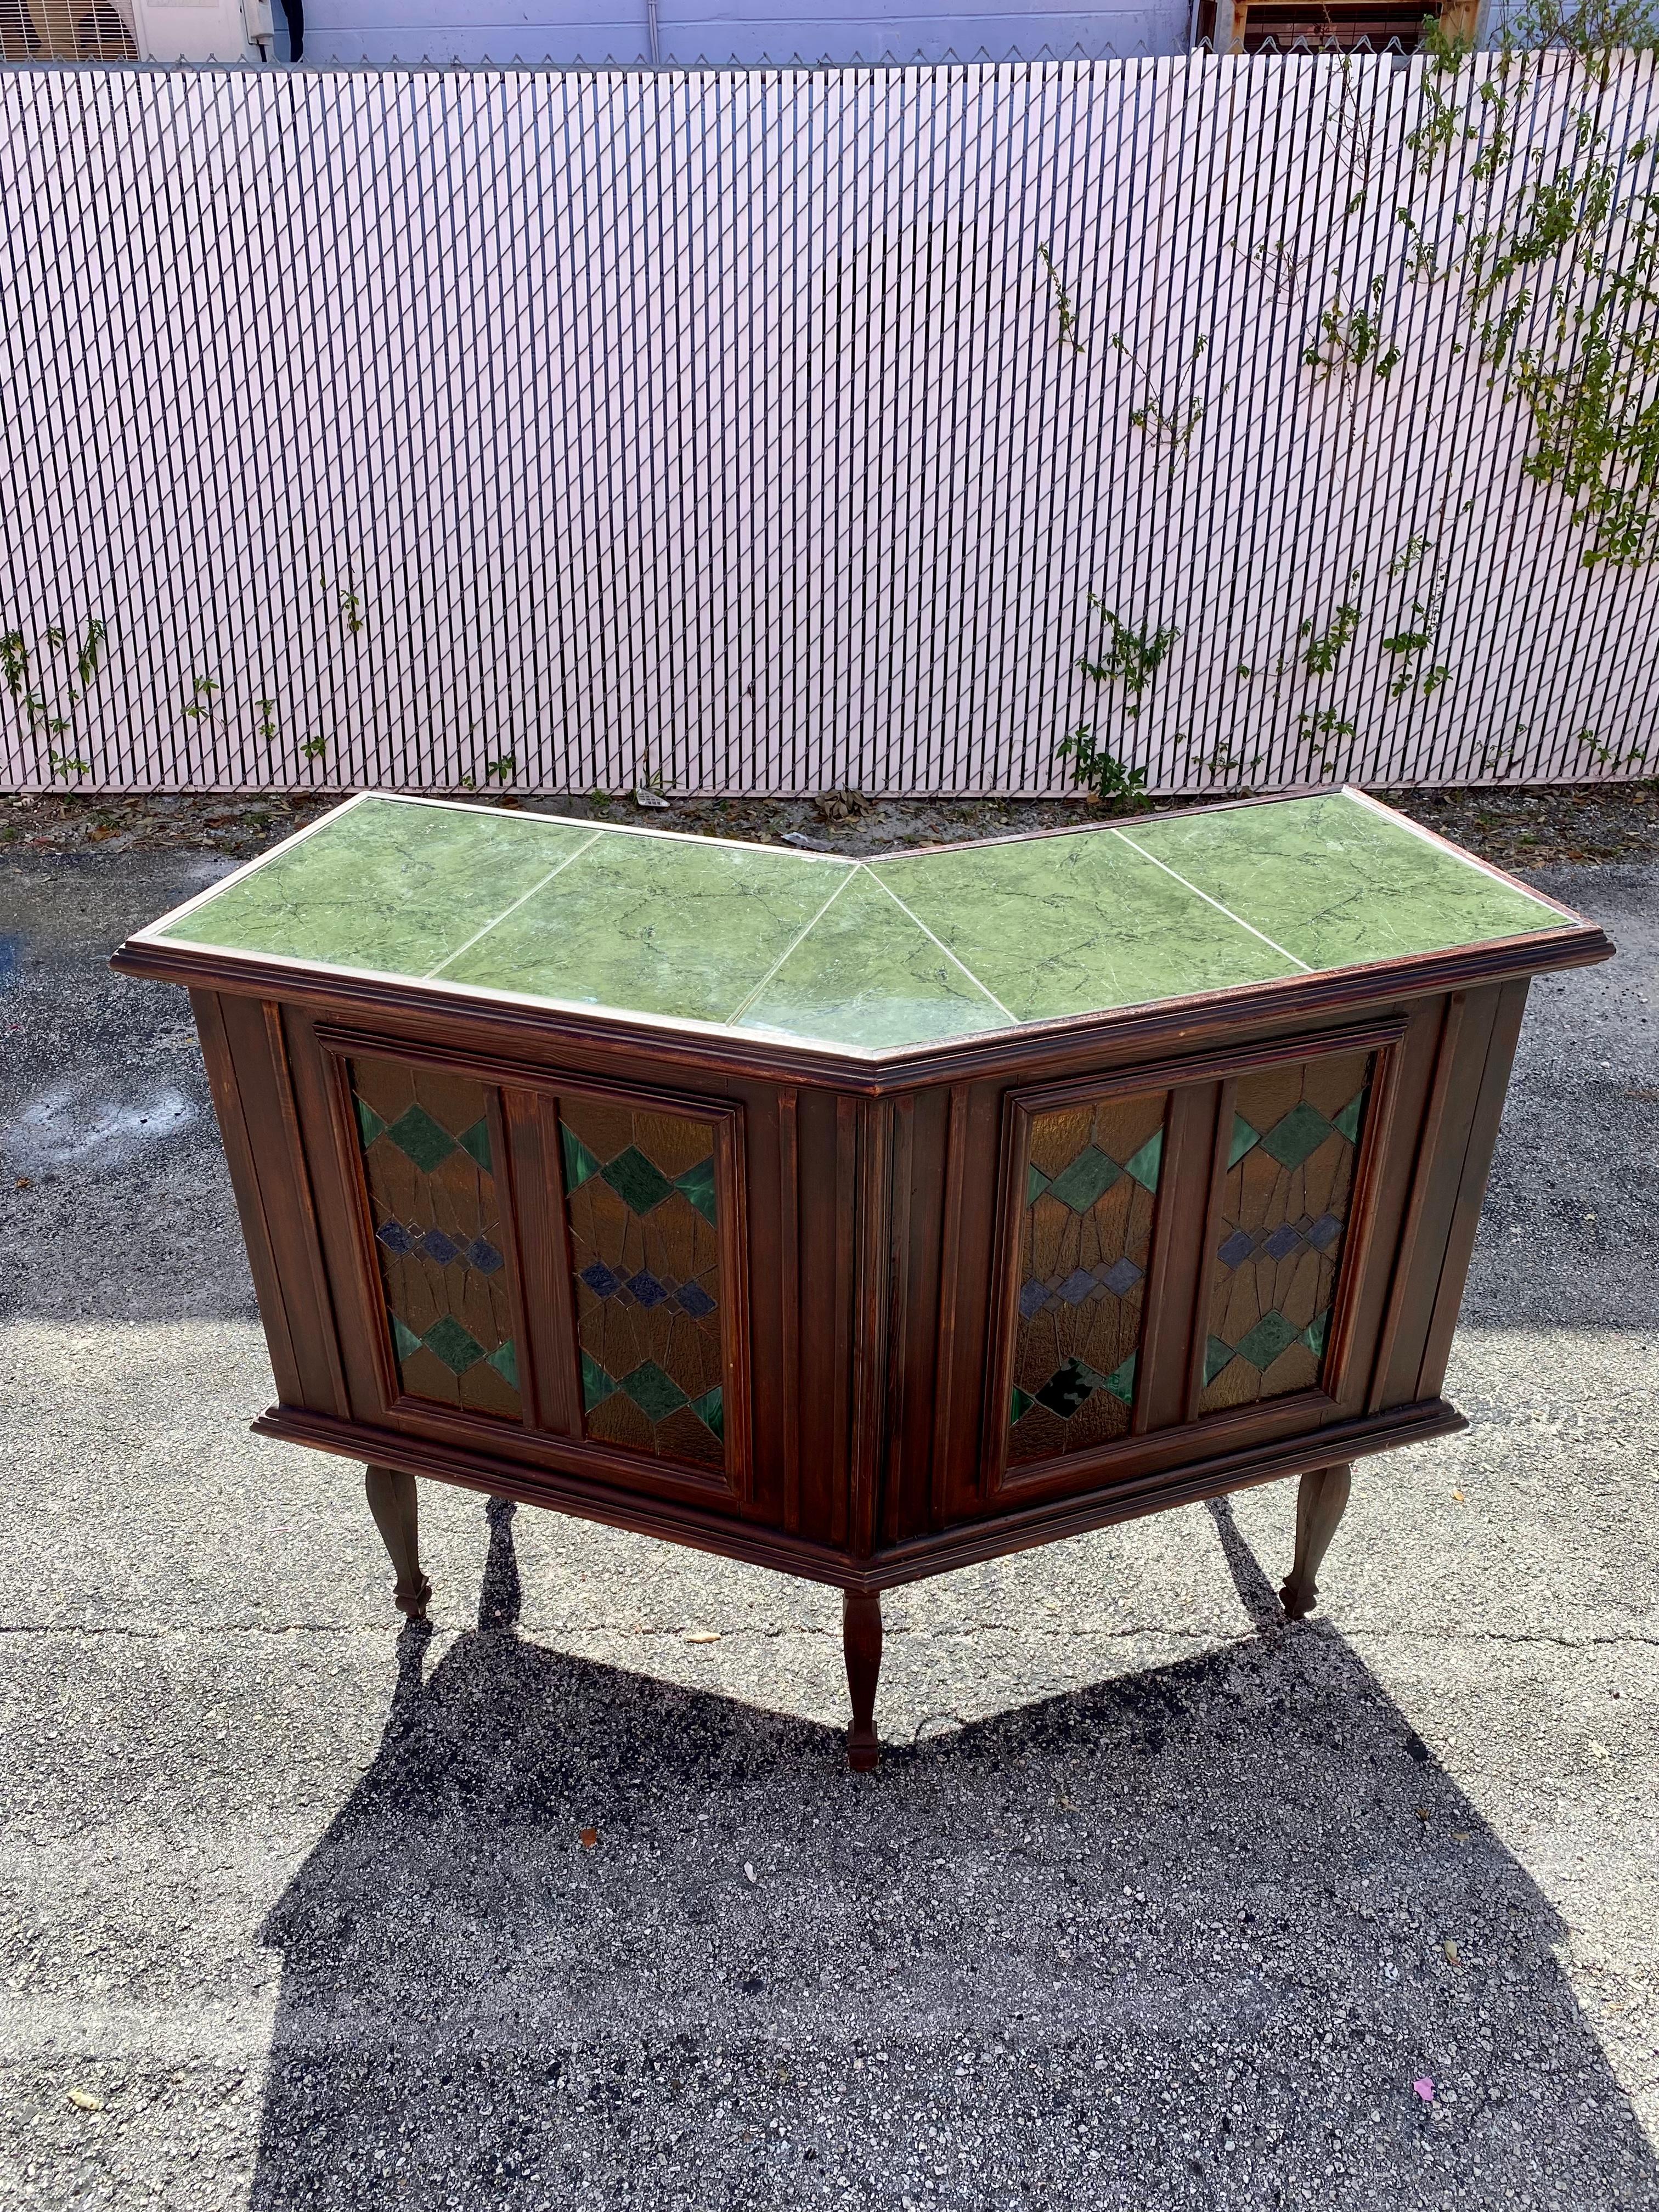 1940s Art Deco Angular Marble Tile Stained Glass Bar Cabinet Console In Good Condition For Sale In Fort Lauderdale, FL